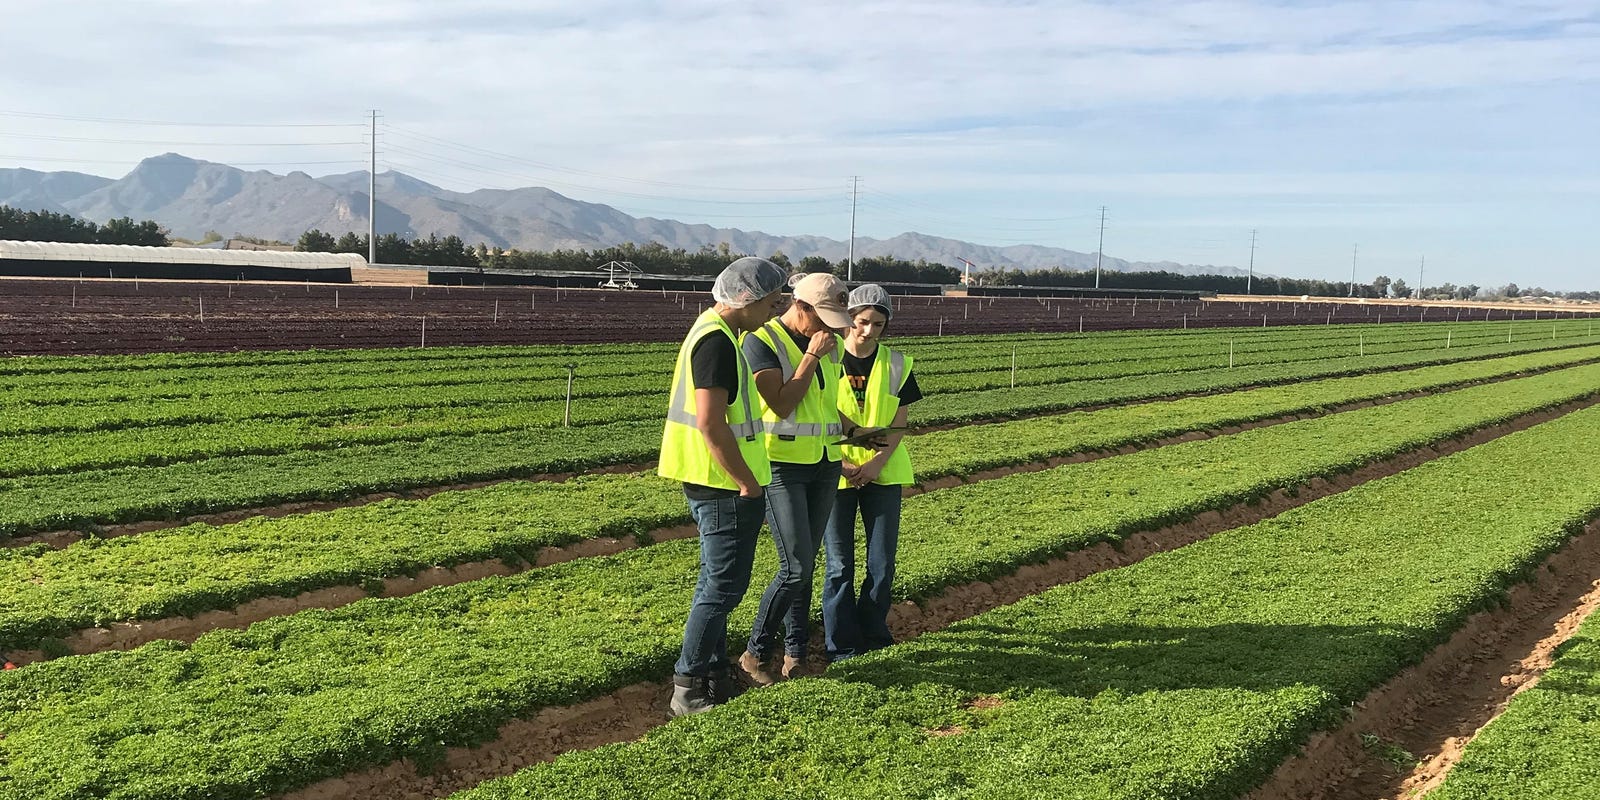 Arizona's $23 billion agriculture industry needs more young workers. This bill could help